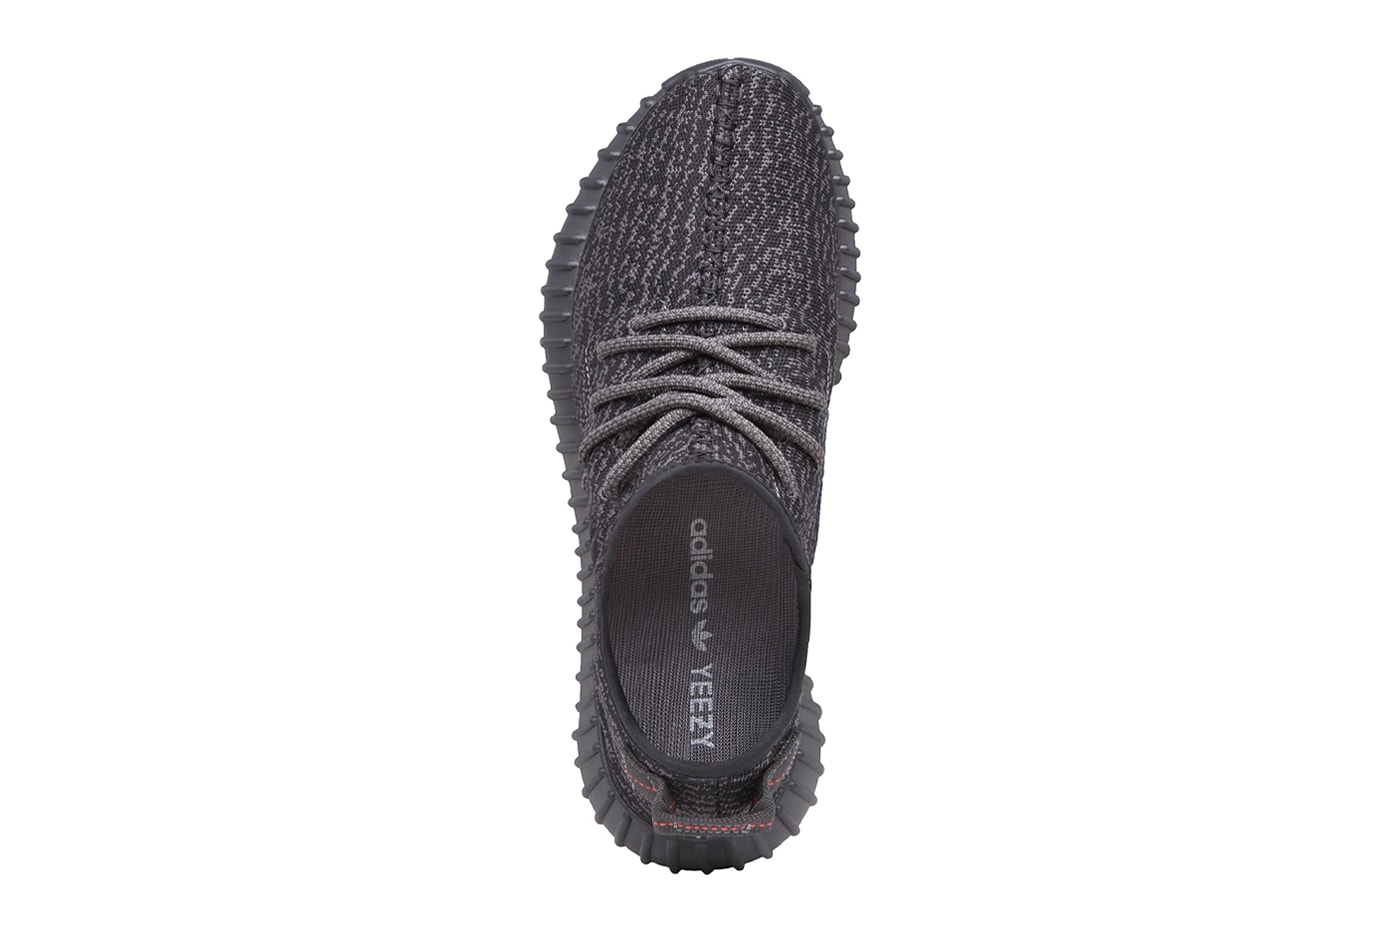 adidas Yeezy boost 350 pirate black august 2015 release date info price OG